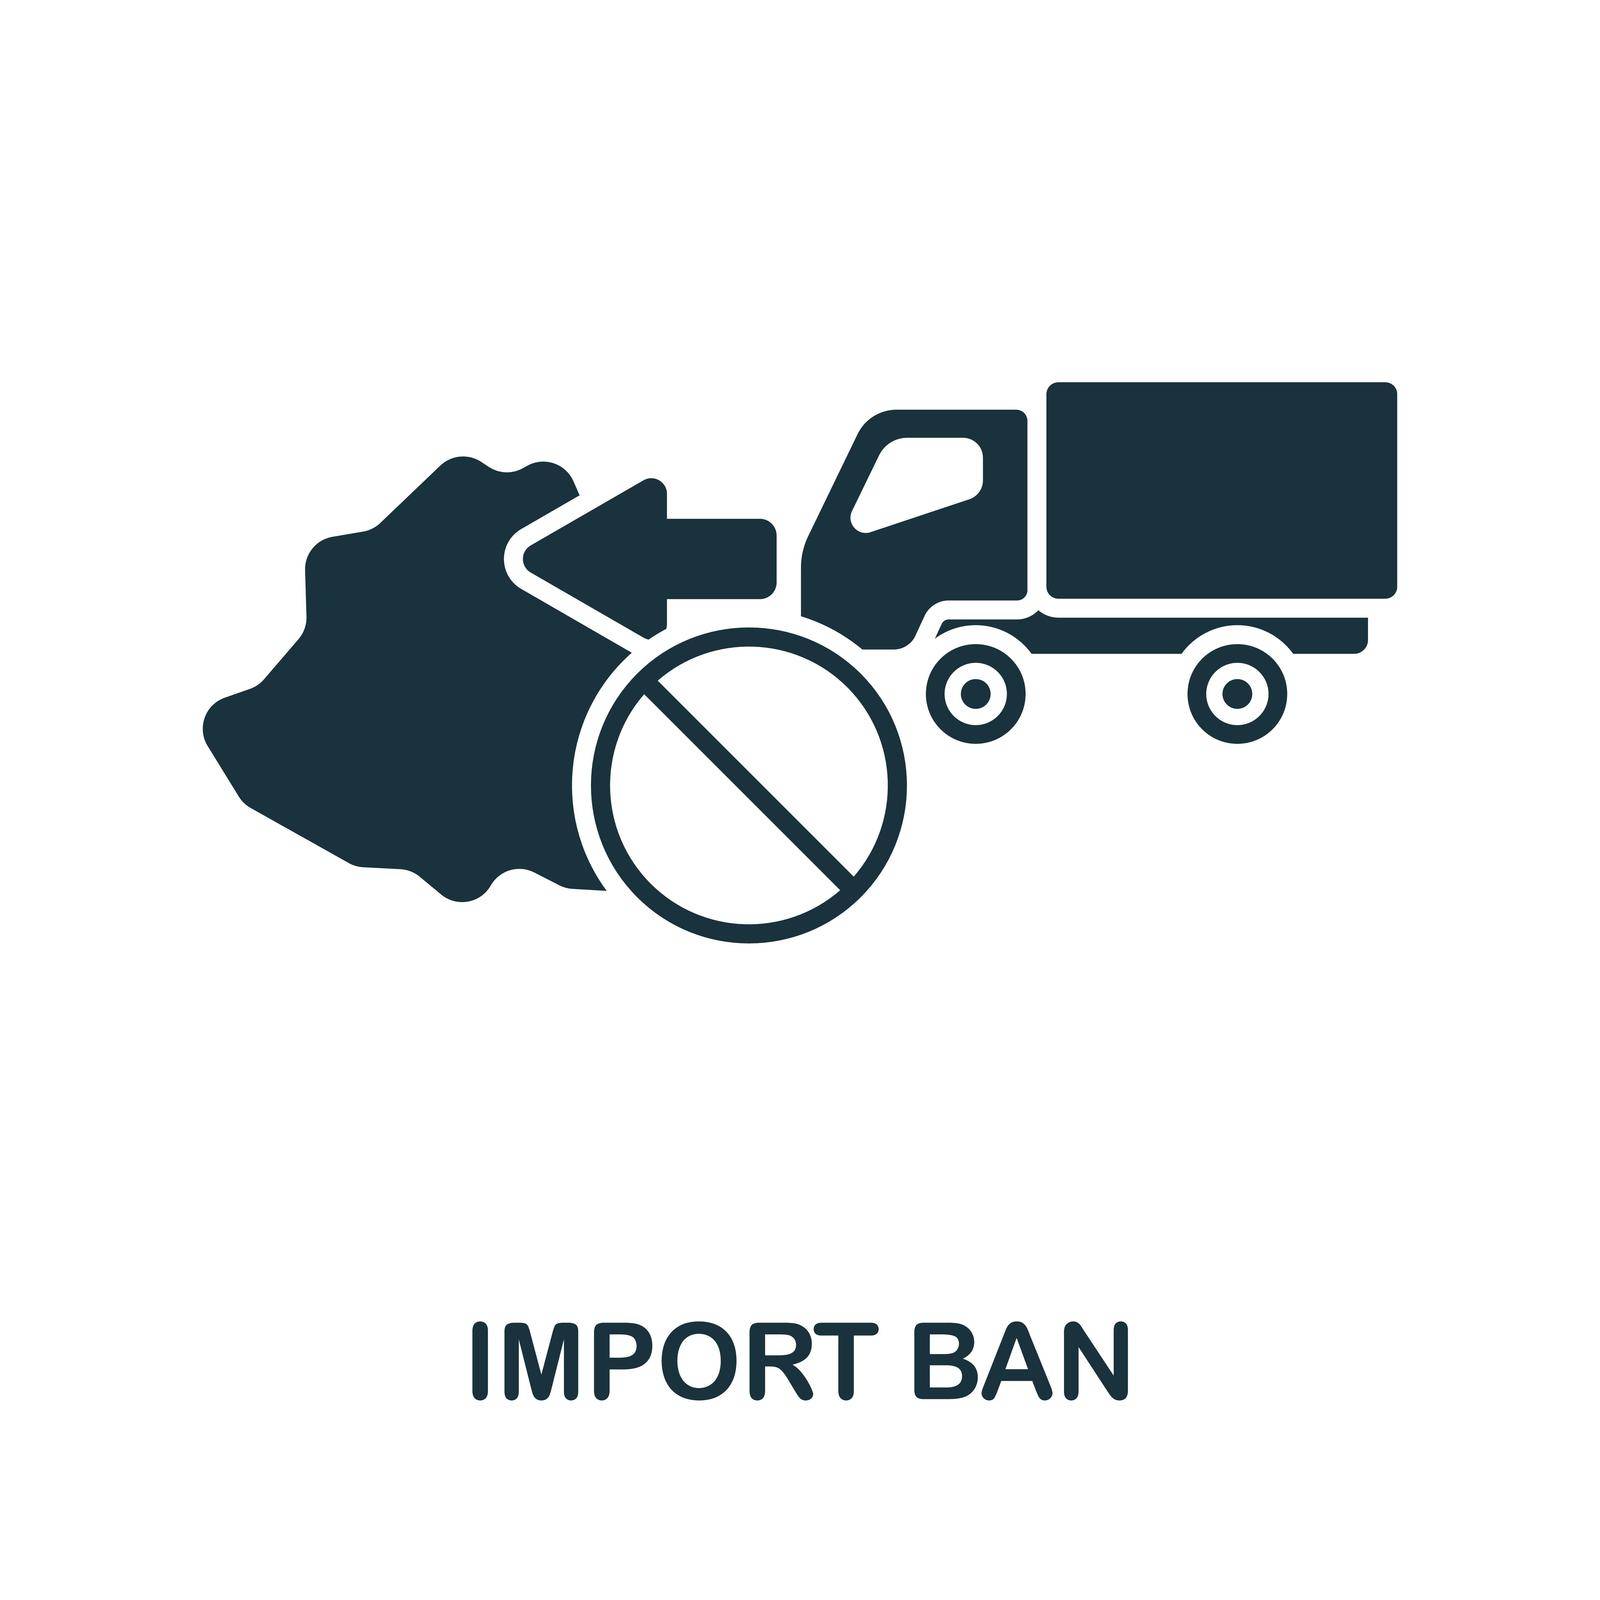 Import Ban icon. Monochrome simple line Economic Crisis icon for templates, web design and infographics by simakovavector